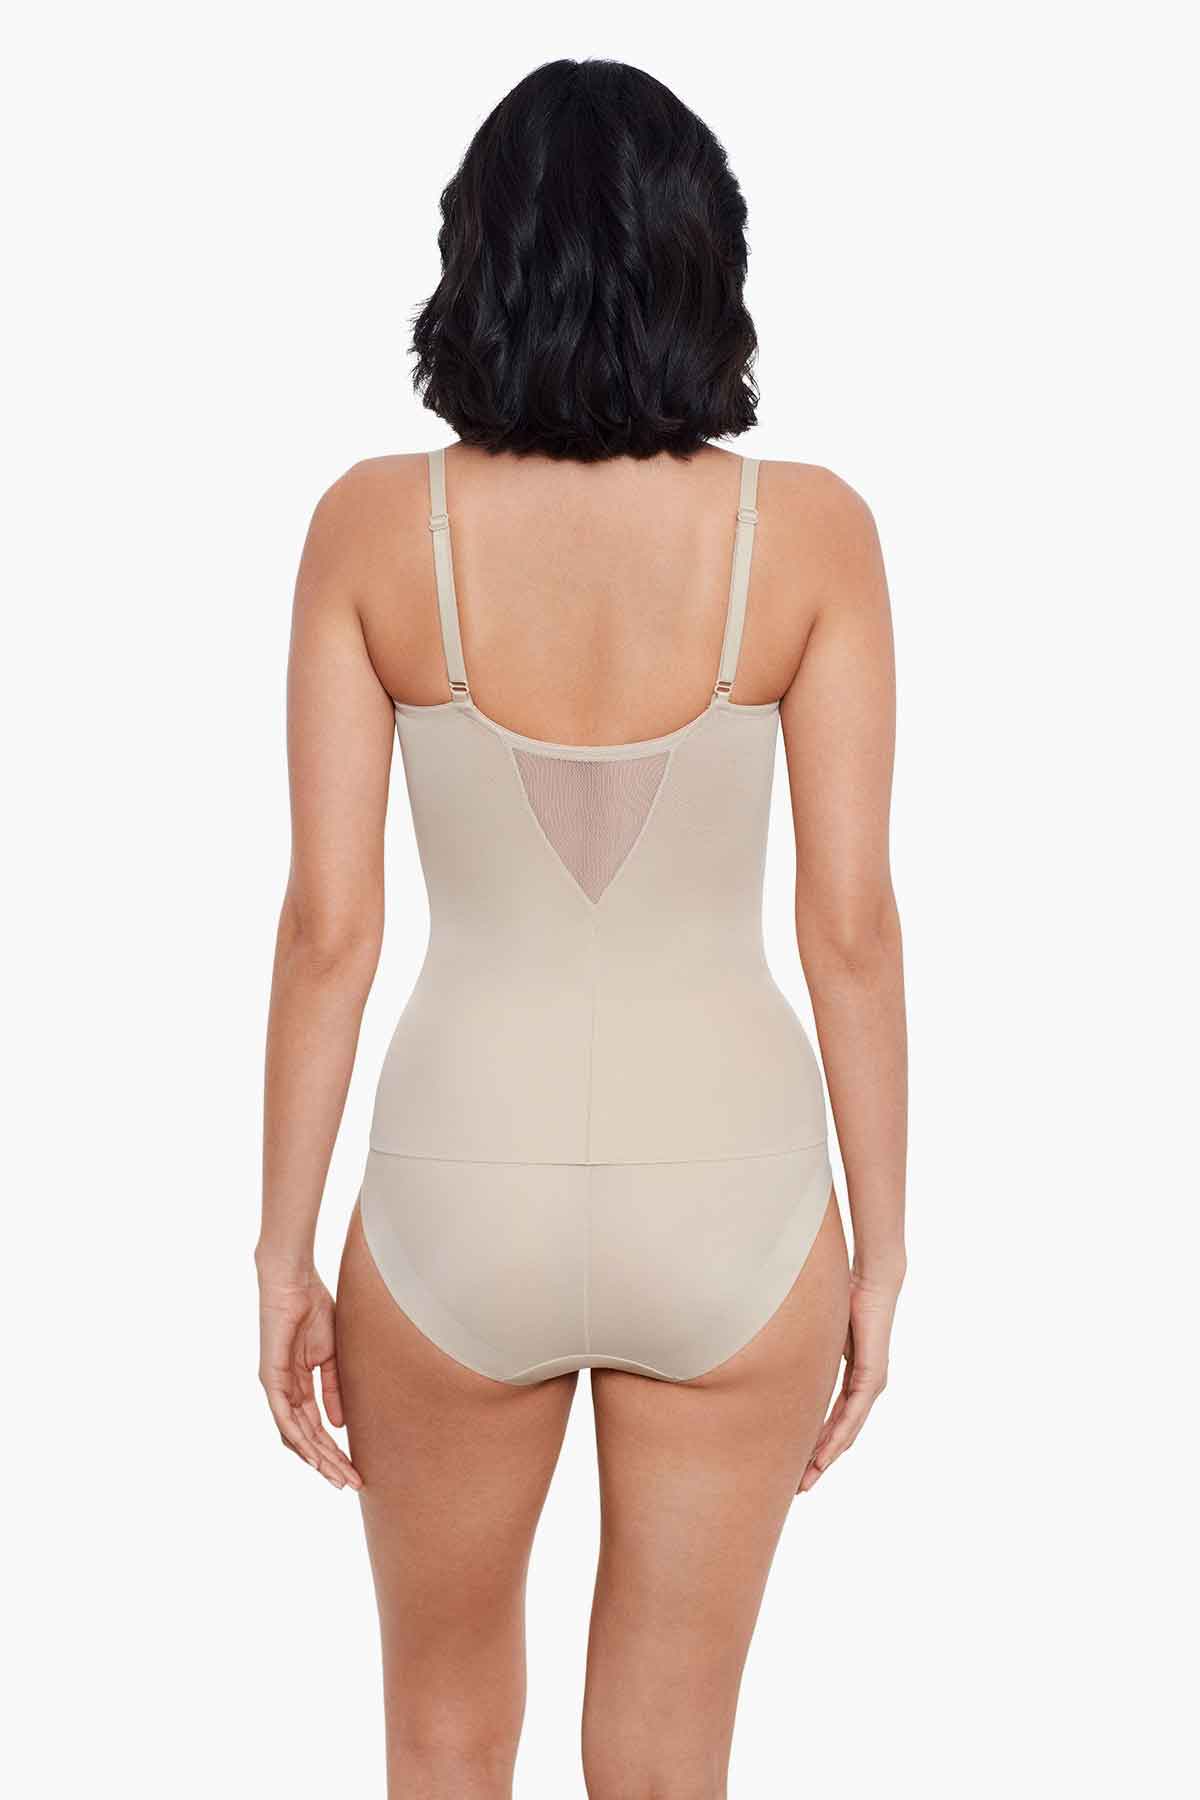 Miraclesuit, Intimates & Sleepwear, Womens Nwt Beige Nude Miraclesuit  Body Shaper Size 38d Style 2665 Underwire New